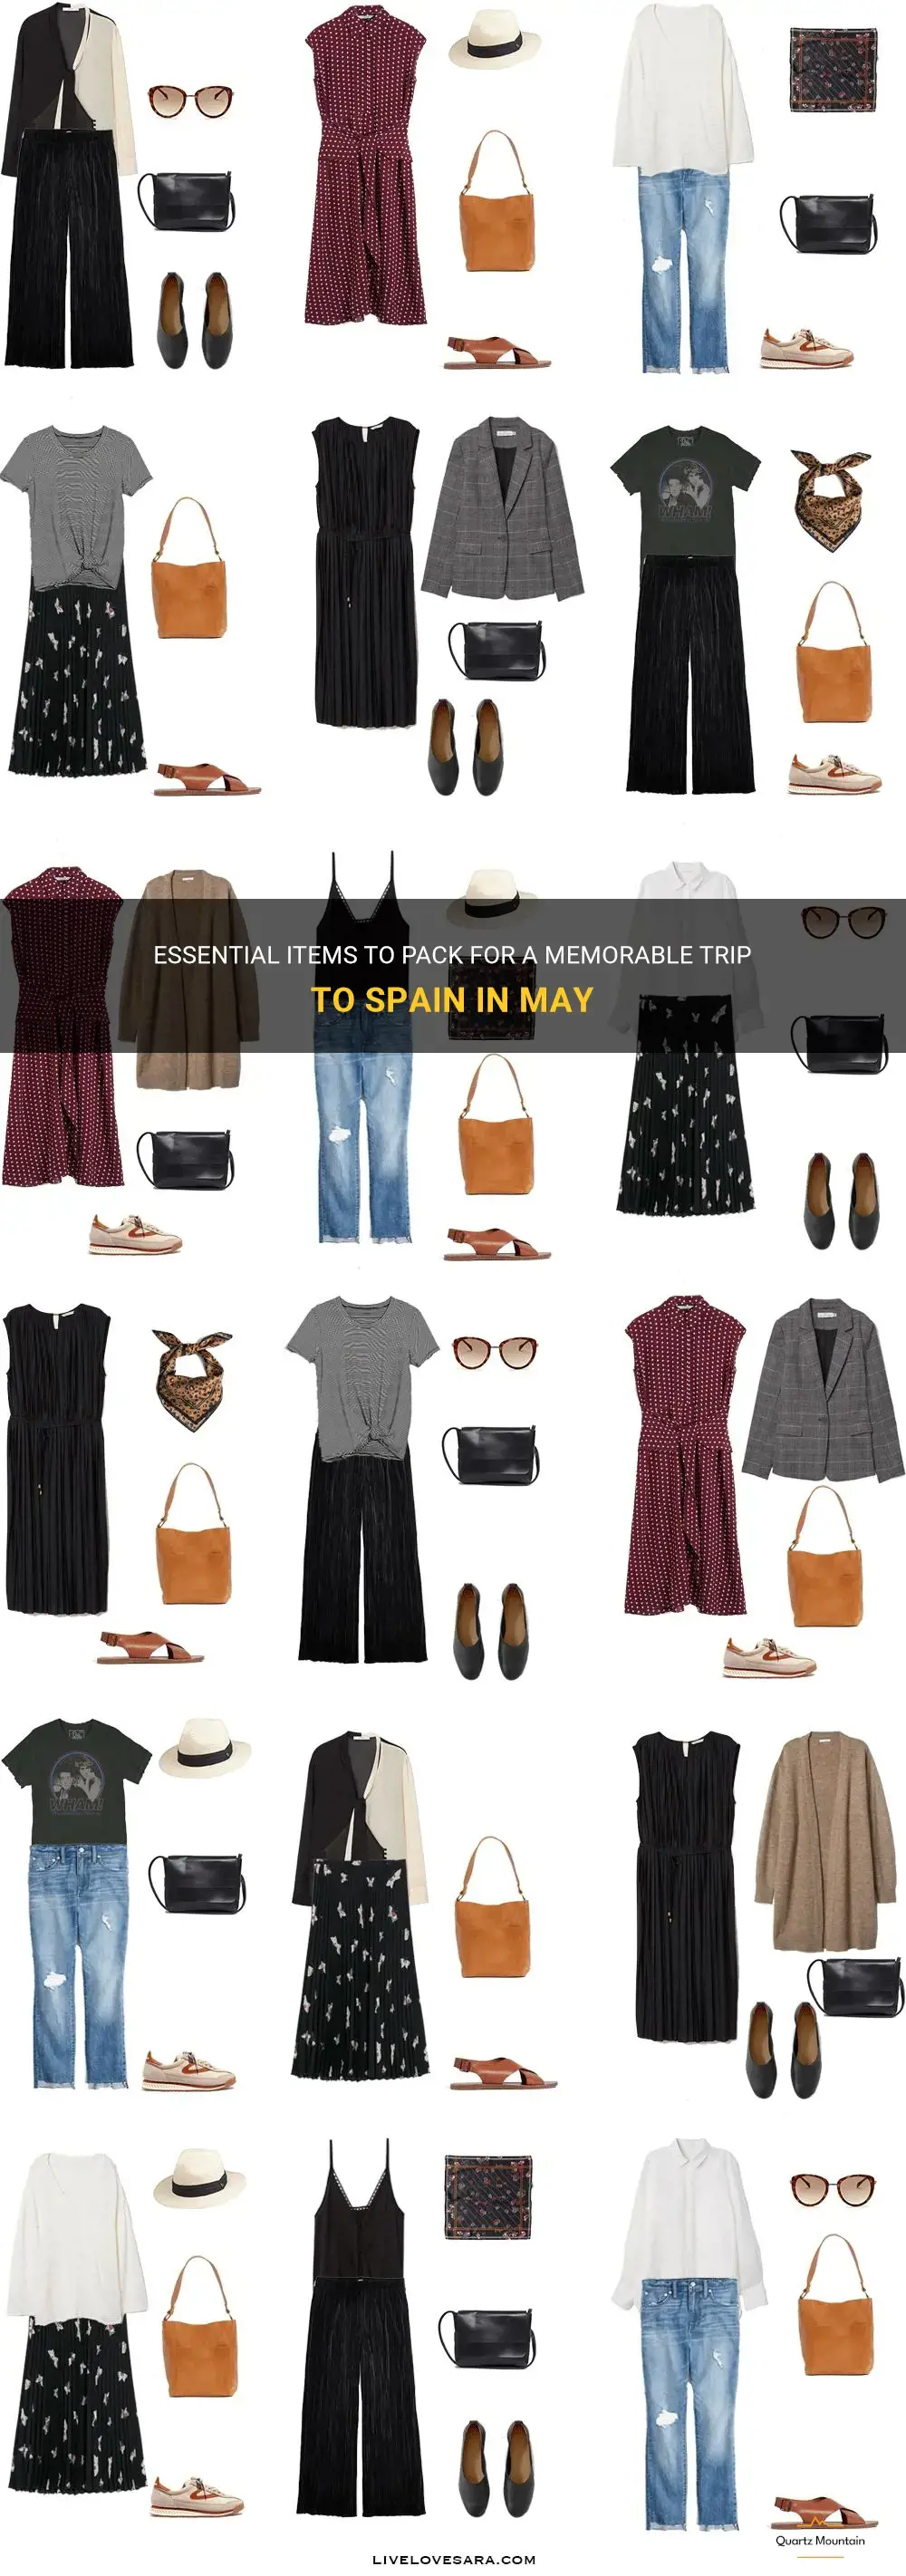 what to pack for trip to spain in may